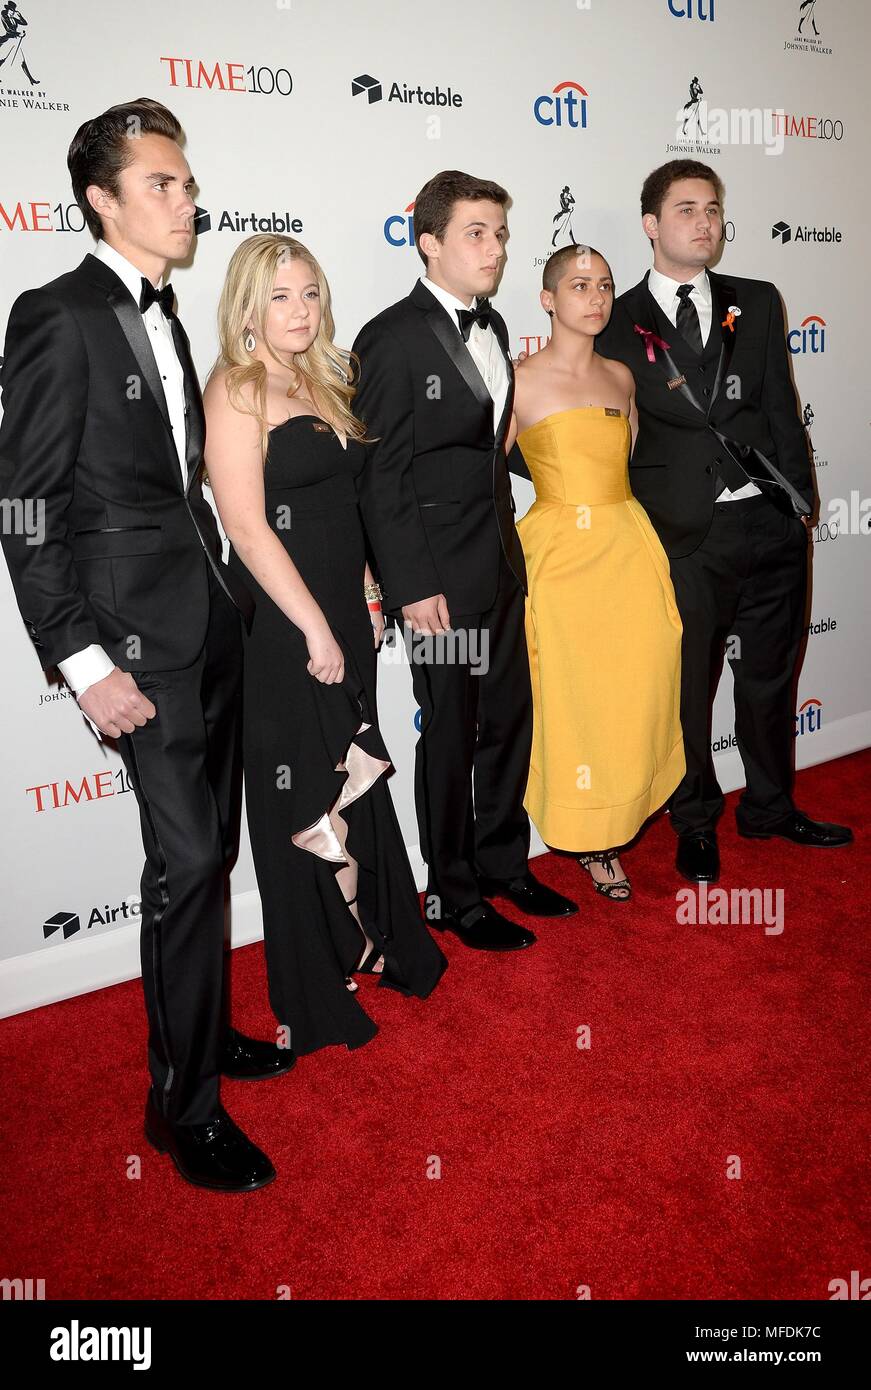 David Hogg, Jaclyn Corin, Cameron Kasky, Emma Gonzalez, Alex Wind at arrivals for TIME 100 Gala, Jazz at Lincoln Center's Frederick P. Rose Hall, New York, NY April 24, 2018. Photo By: Kristin Callahan/Everett Collection Stock Photo